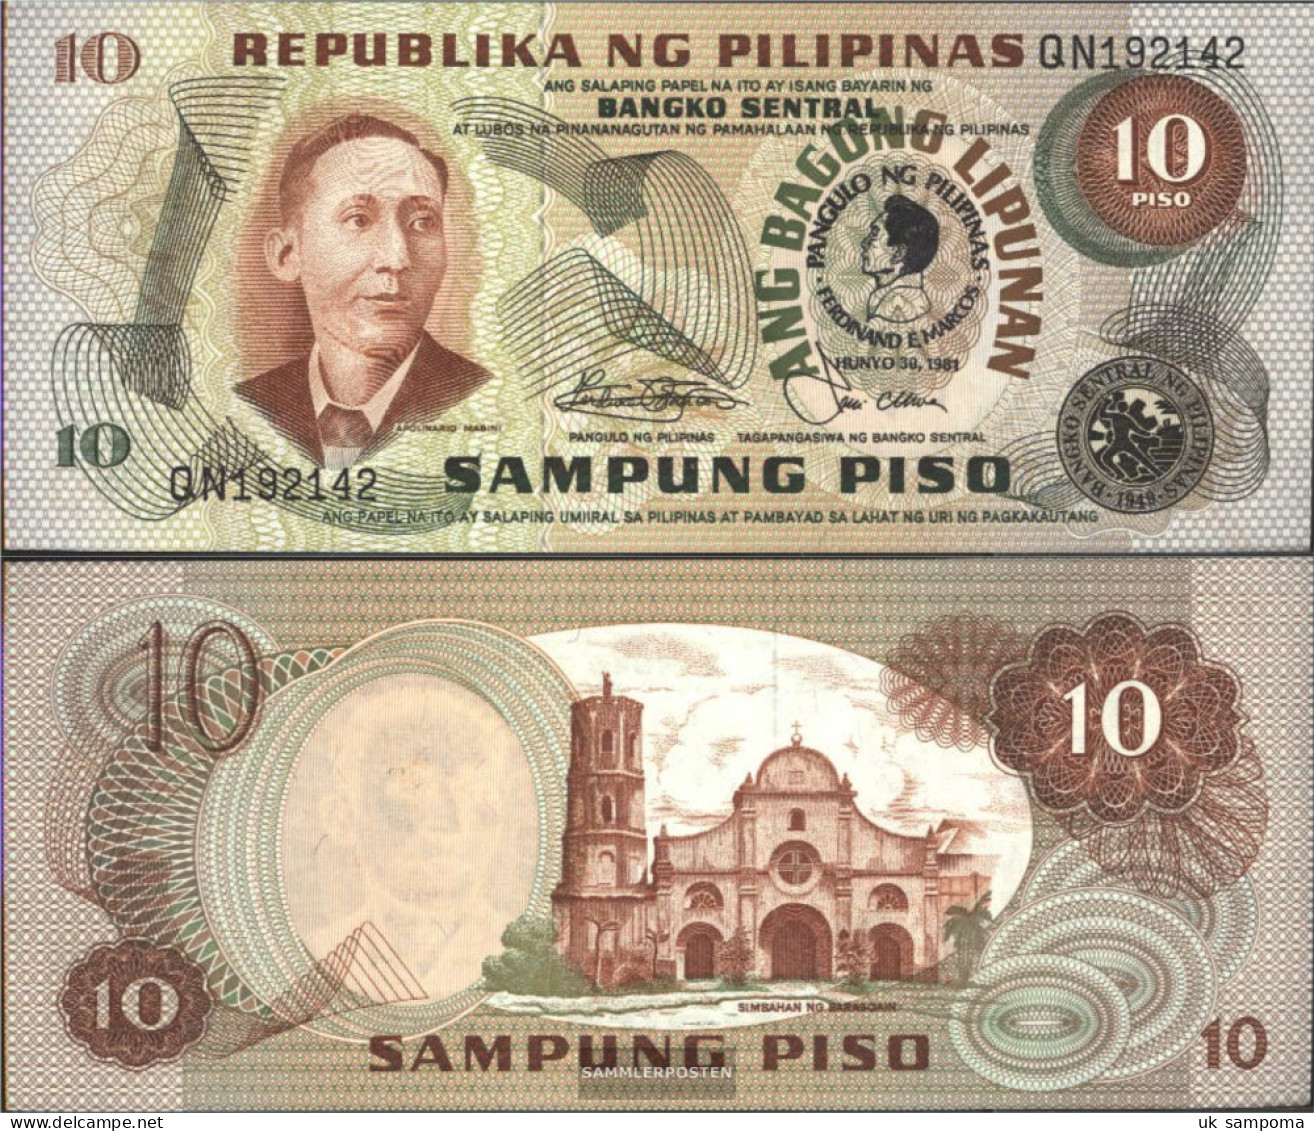 Philippines Pick-number: 167a Uncirculated 1981 10 Piso - Philippines